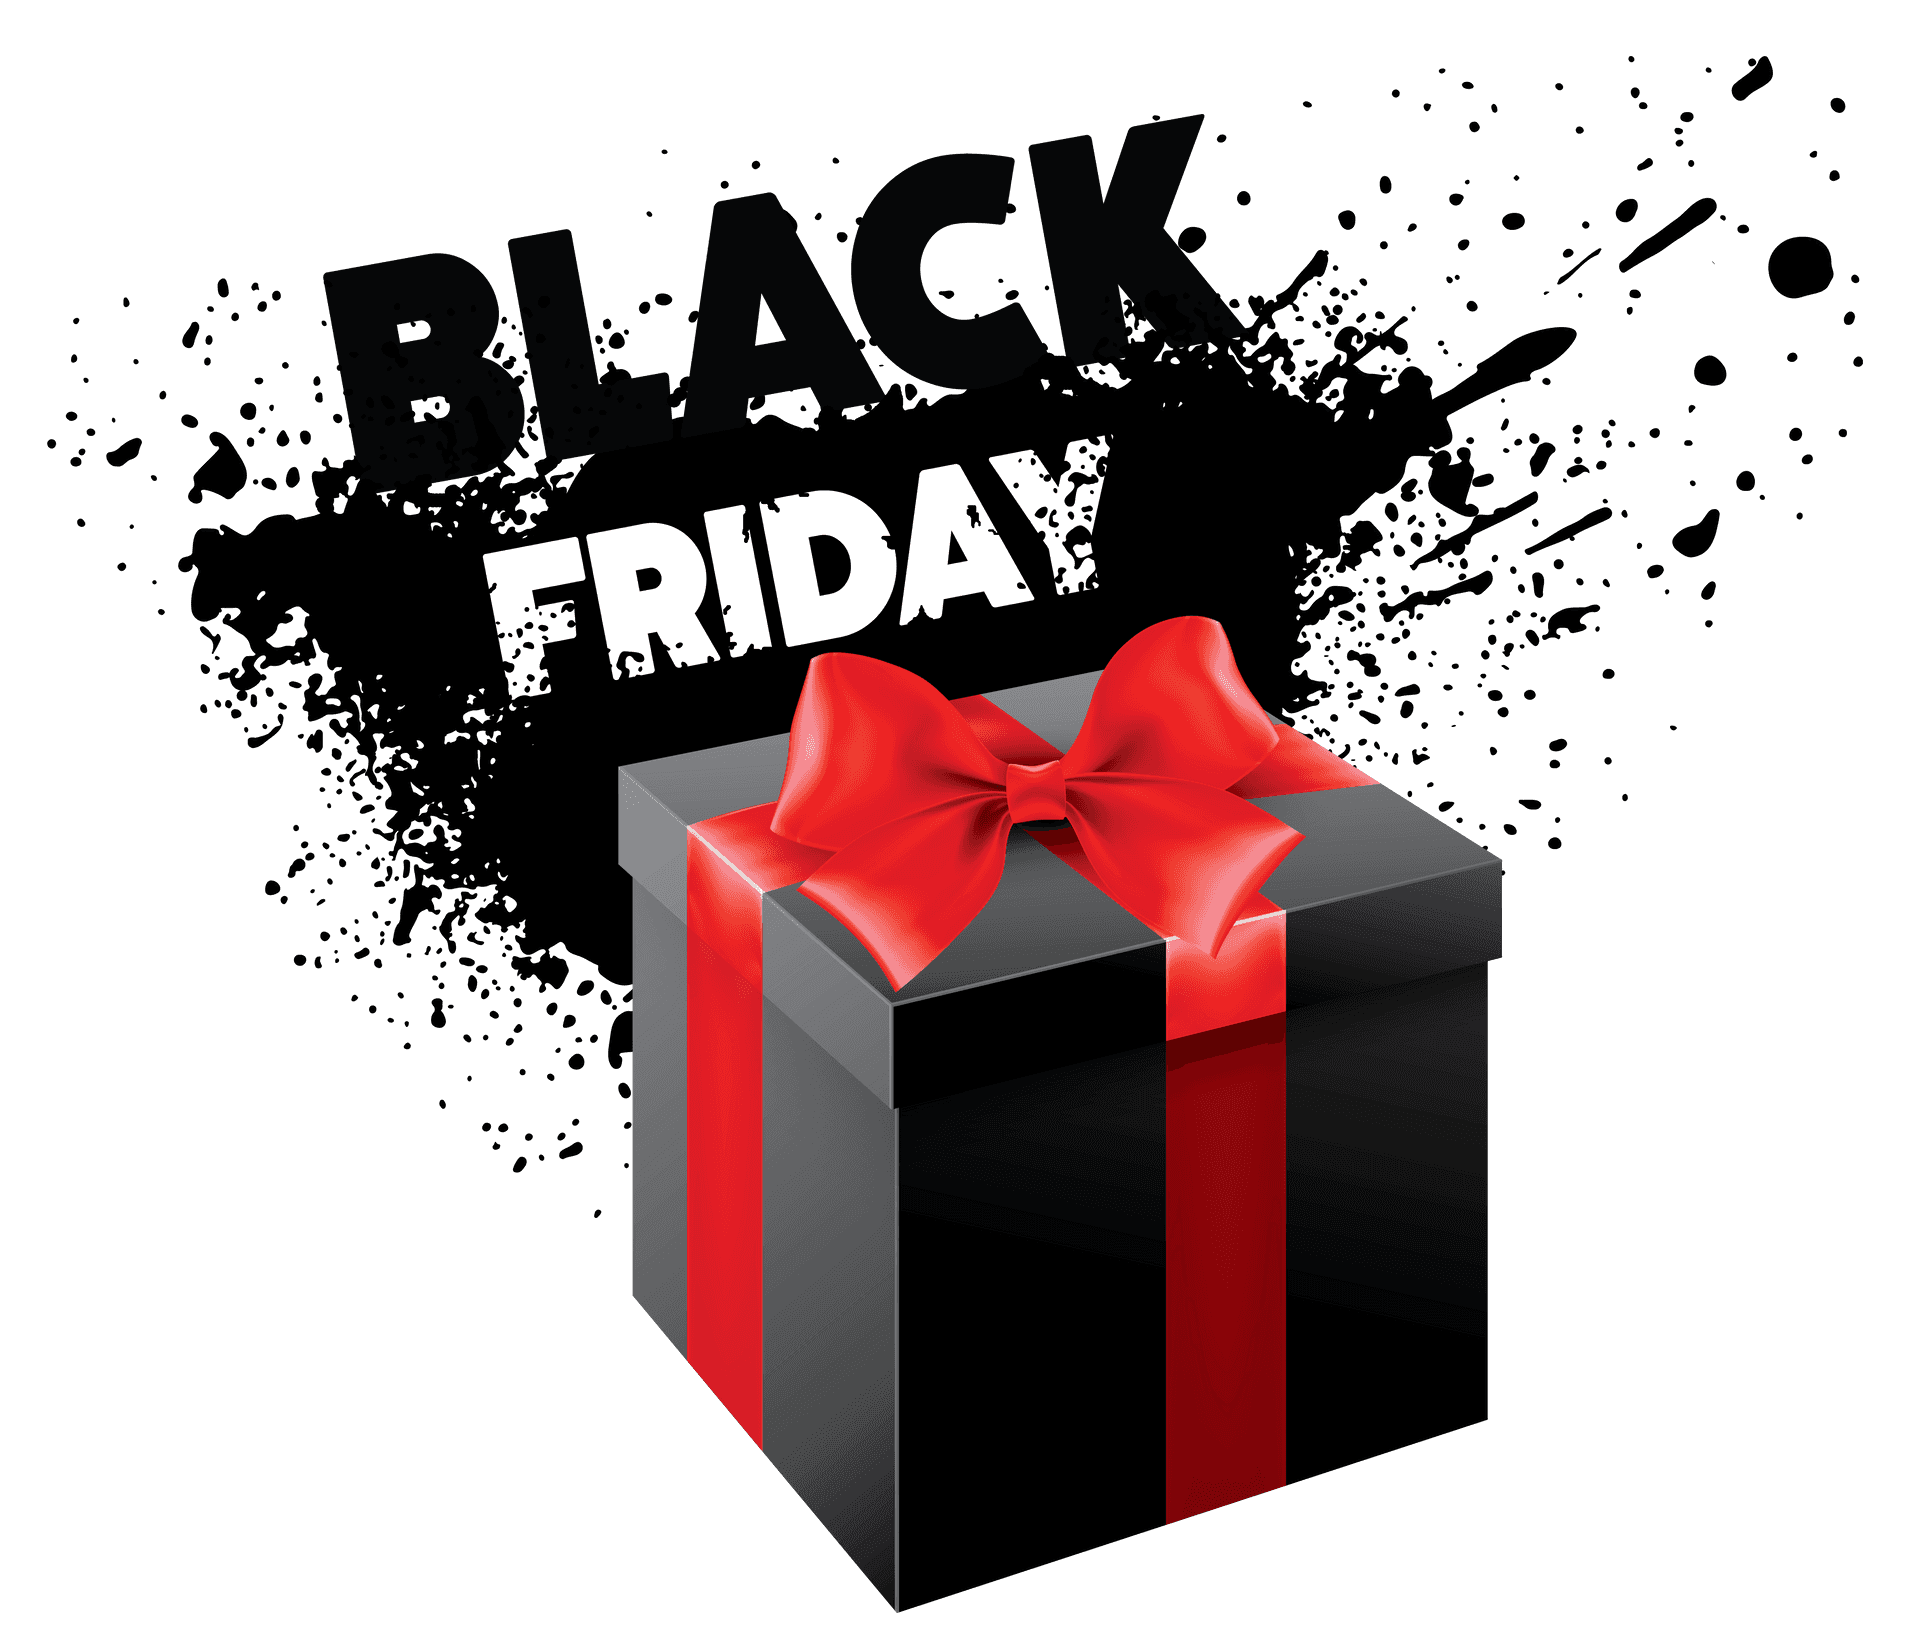 Black Friday - A Black Box With A Red Bow